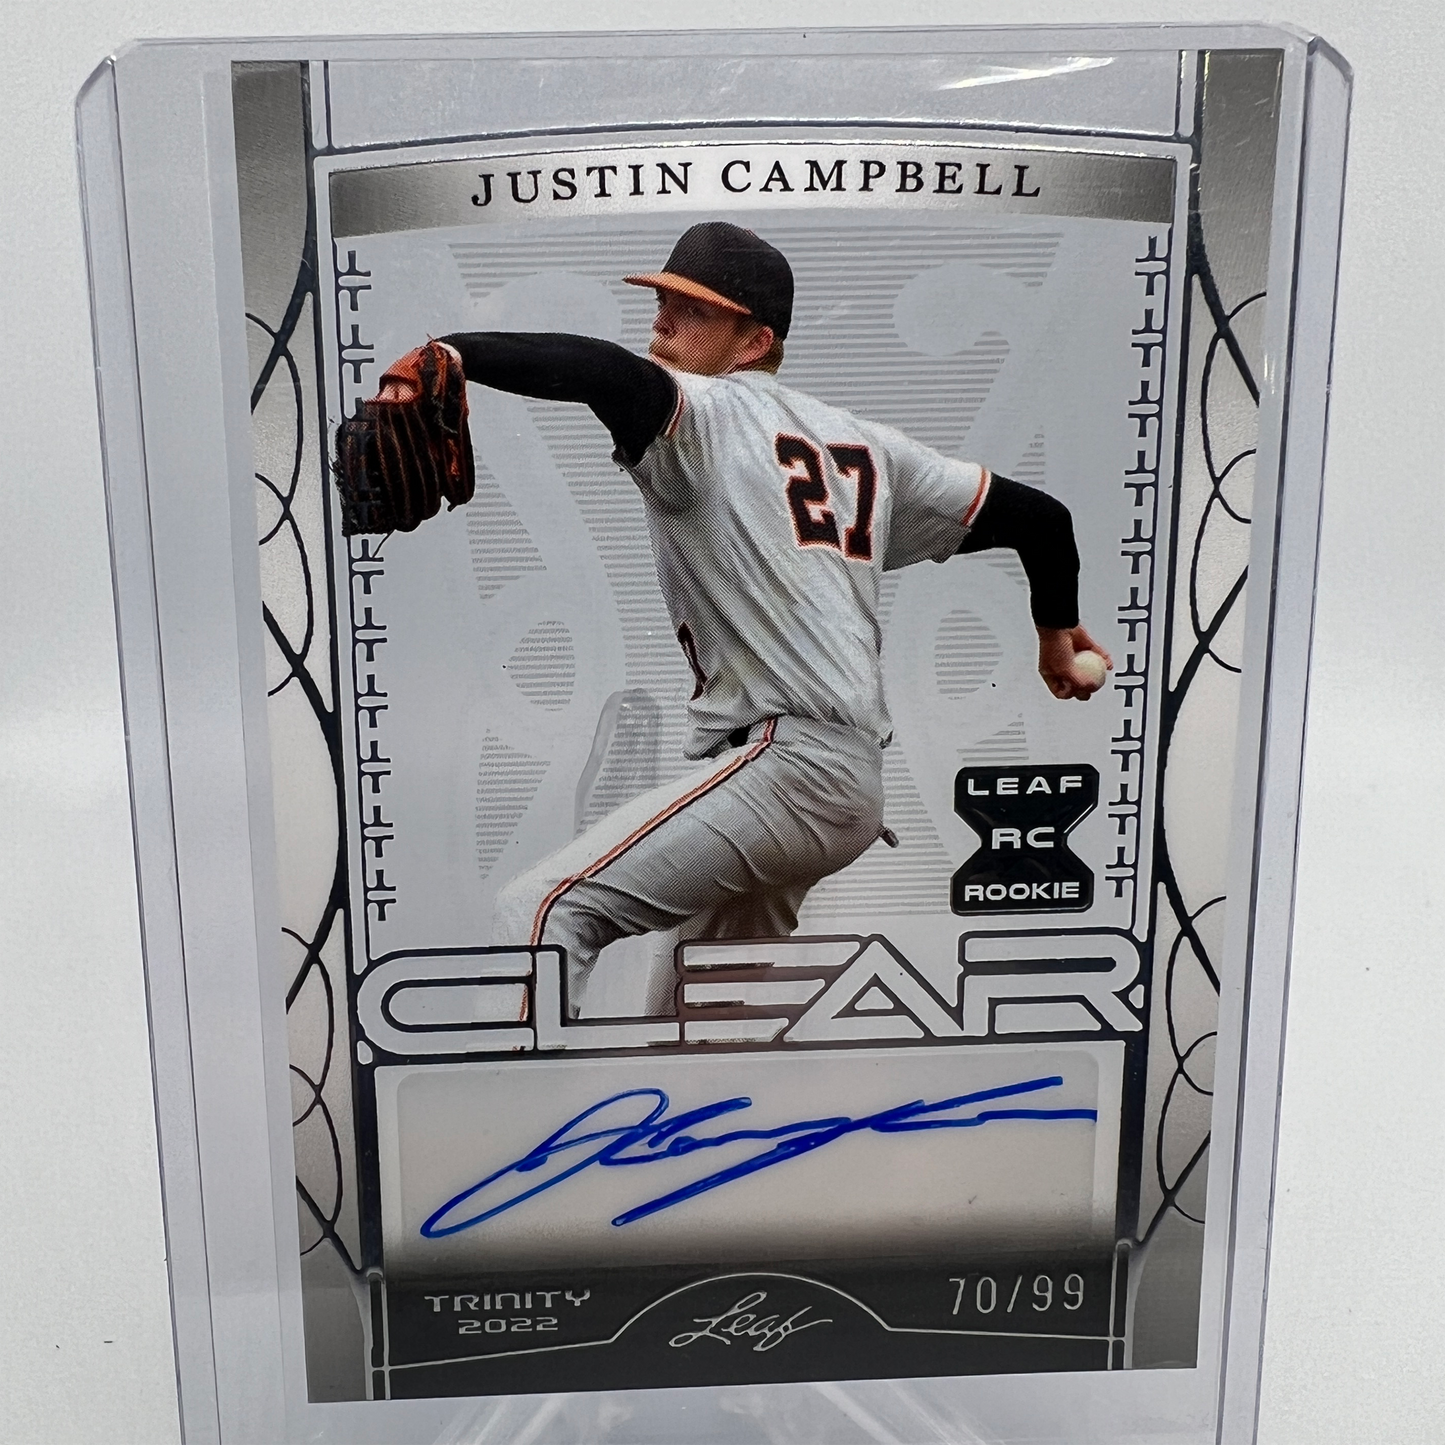 Justin Campbell 70/99 Autographed Baseball Card